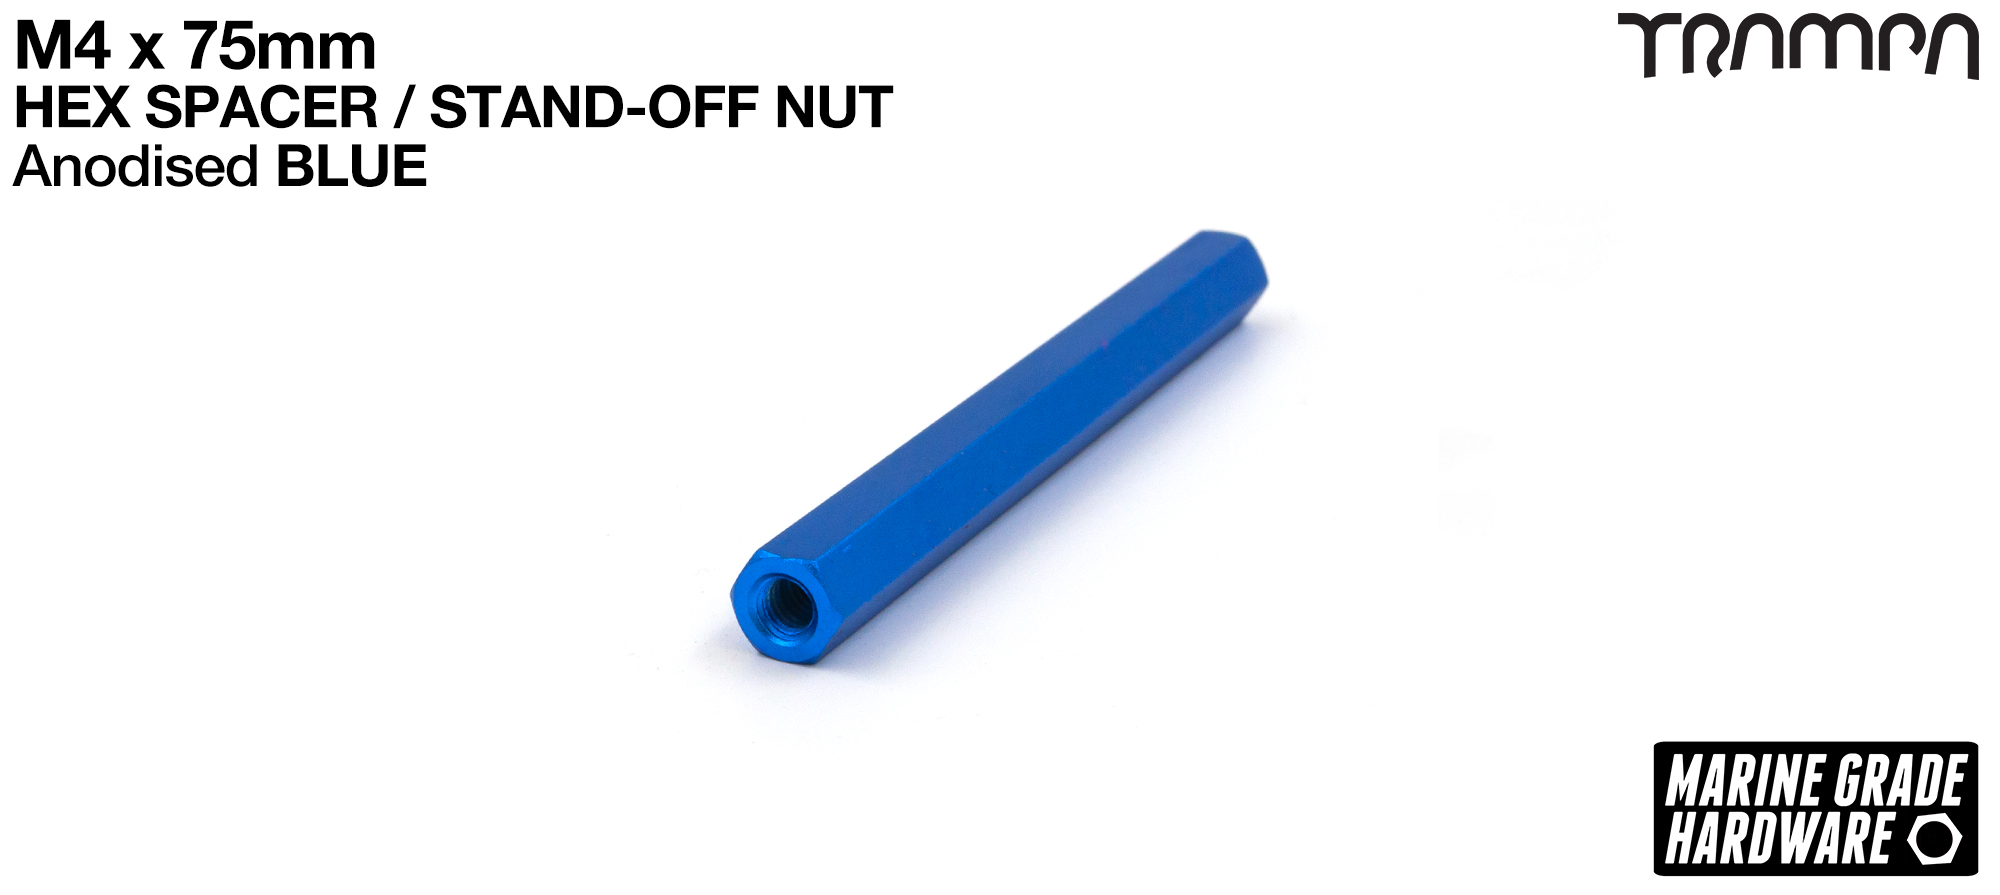 M4 x 75mm Aluminium Threaded HEX Spacer Nut used for assembling the MONSTER Battery Boxes - BLUE